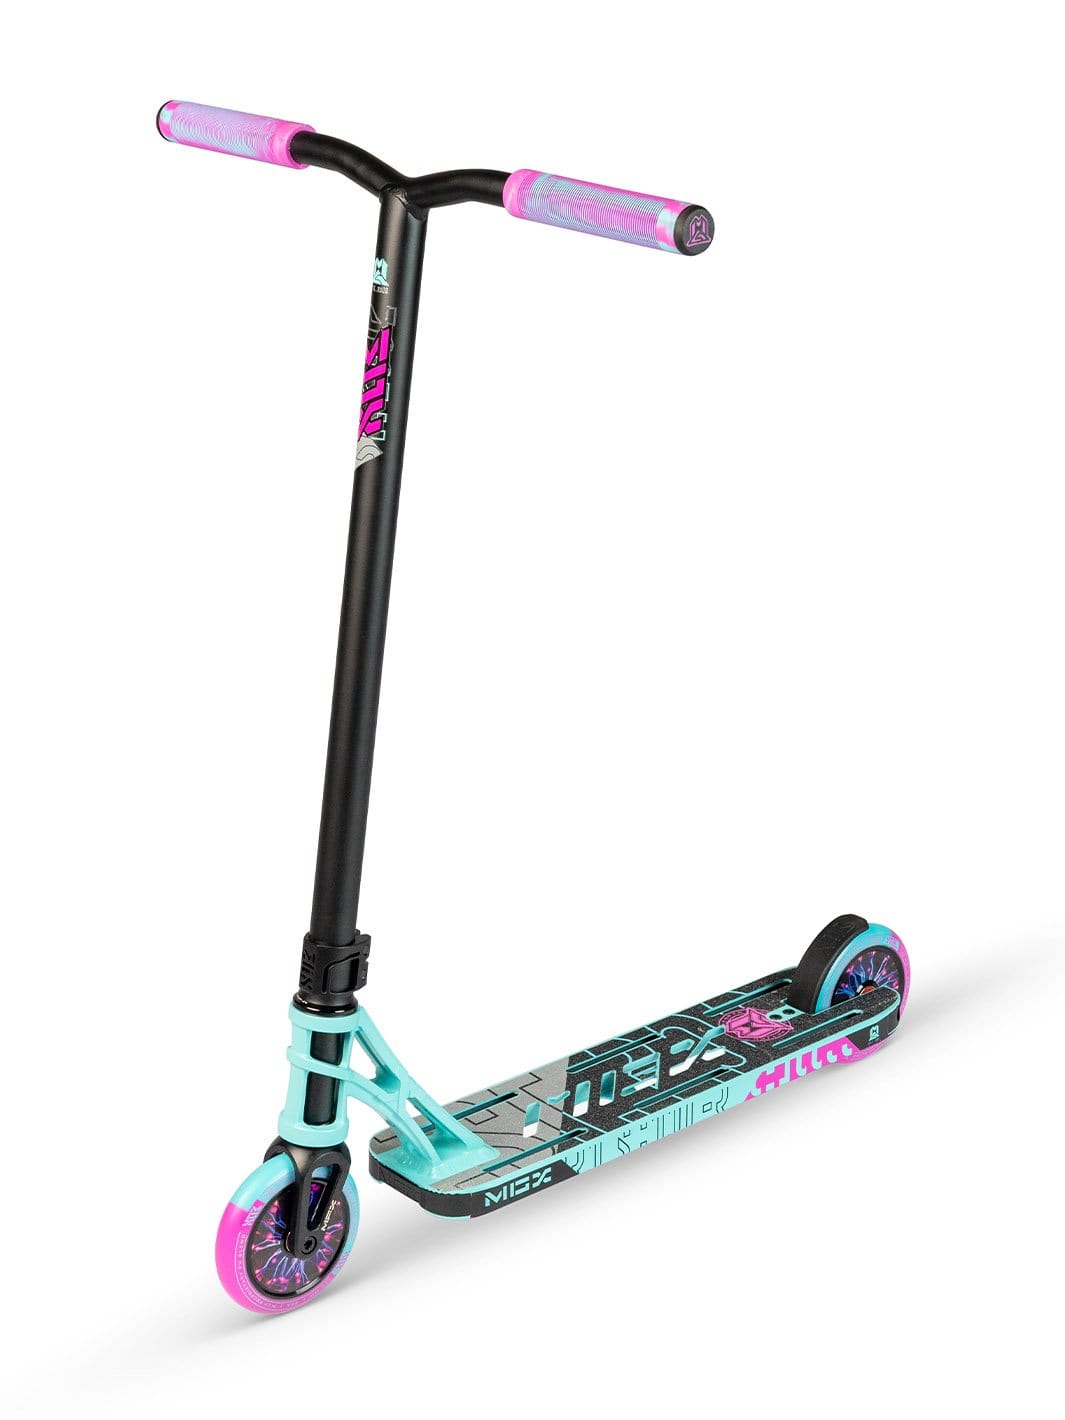 Teal Pink Children Pro Riding Stunt Scooter Skatepark Trick Smooth Riding